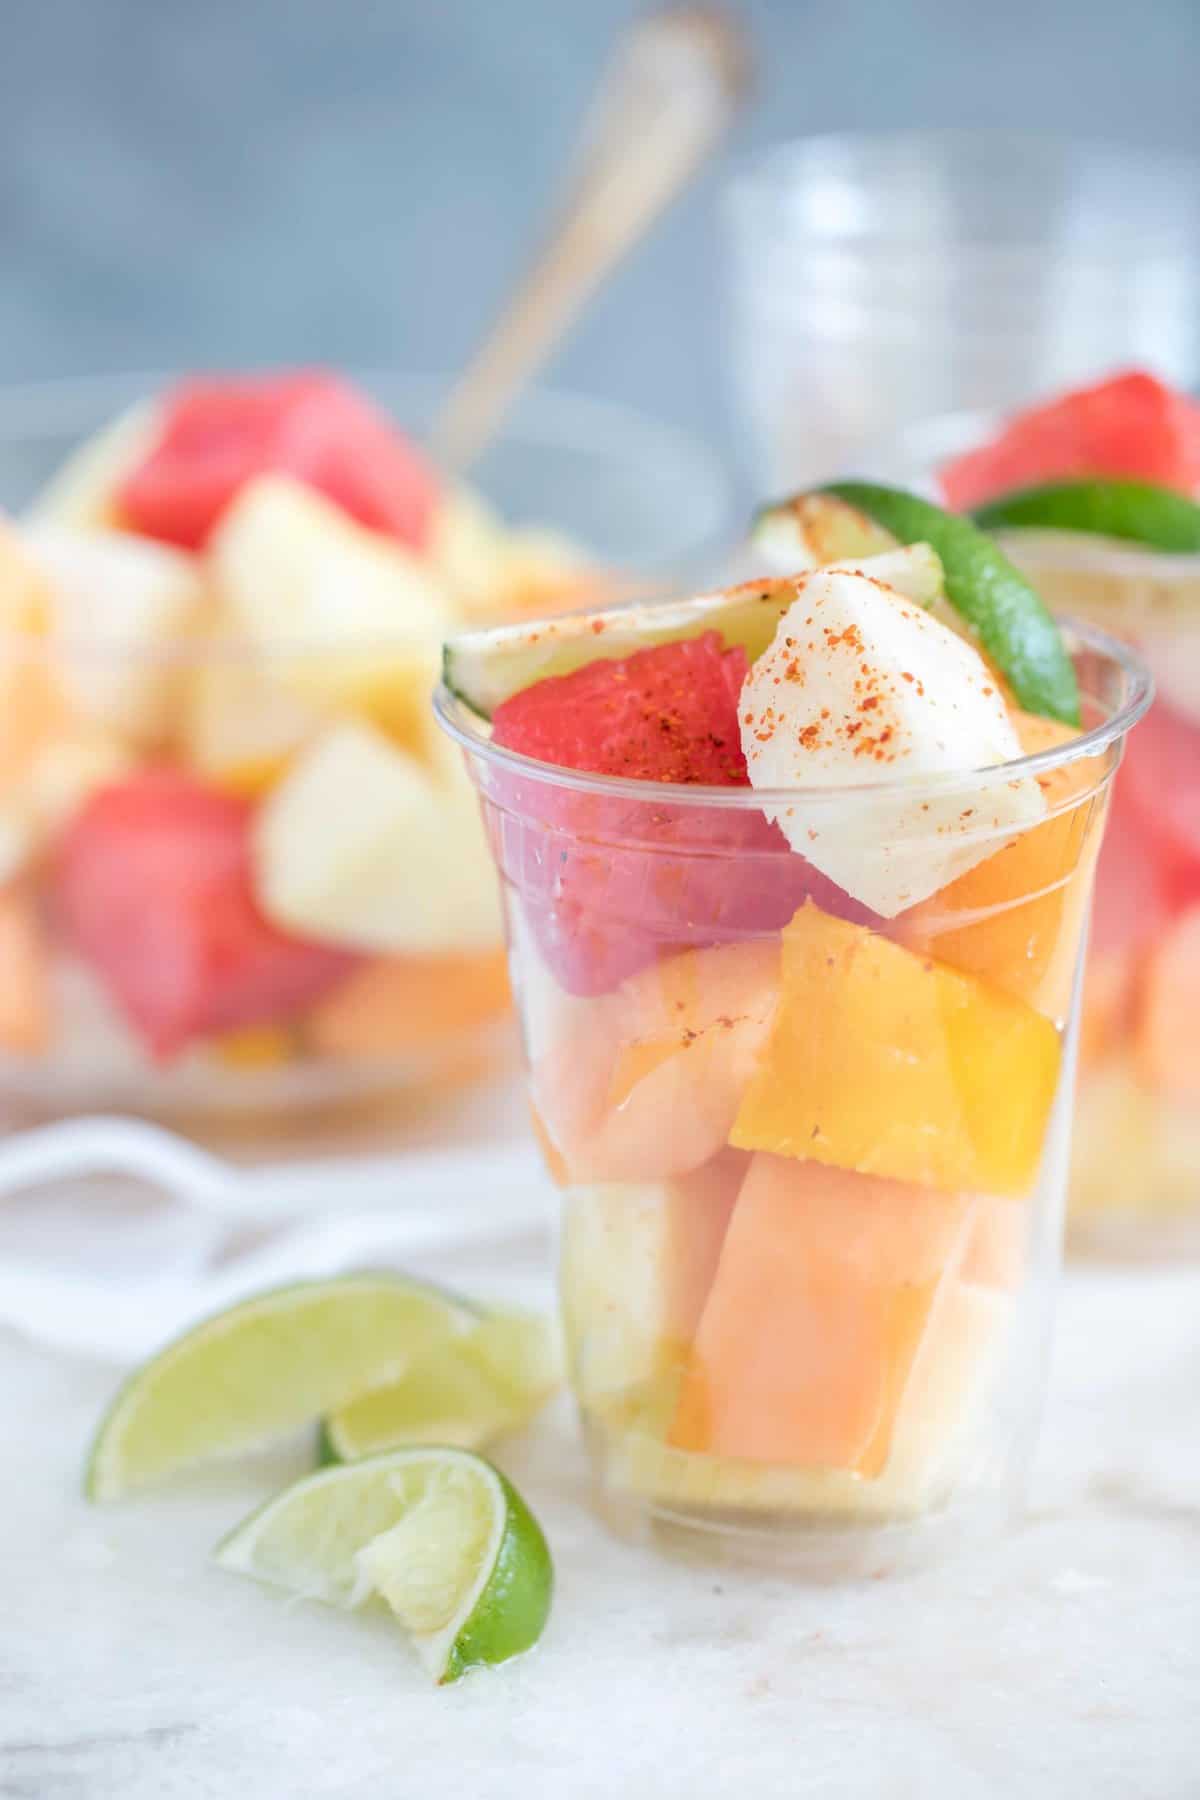 Fruit Cups - The Harvest Kitchen